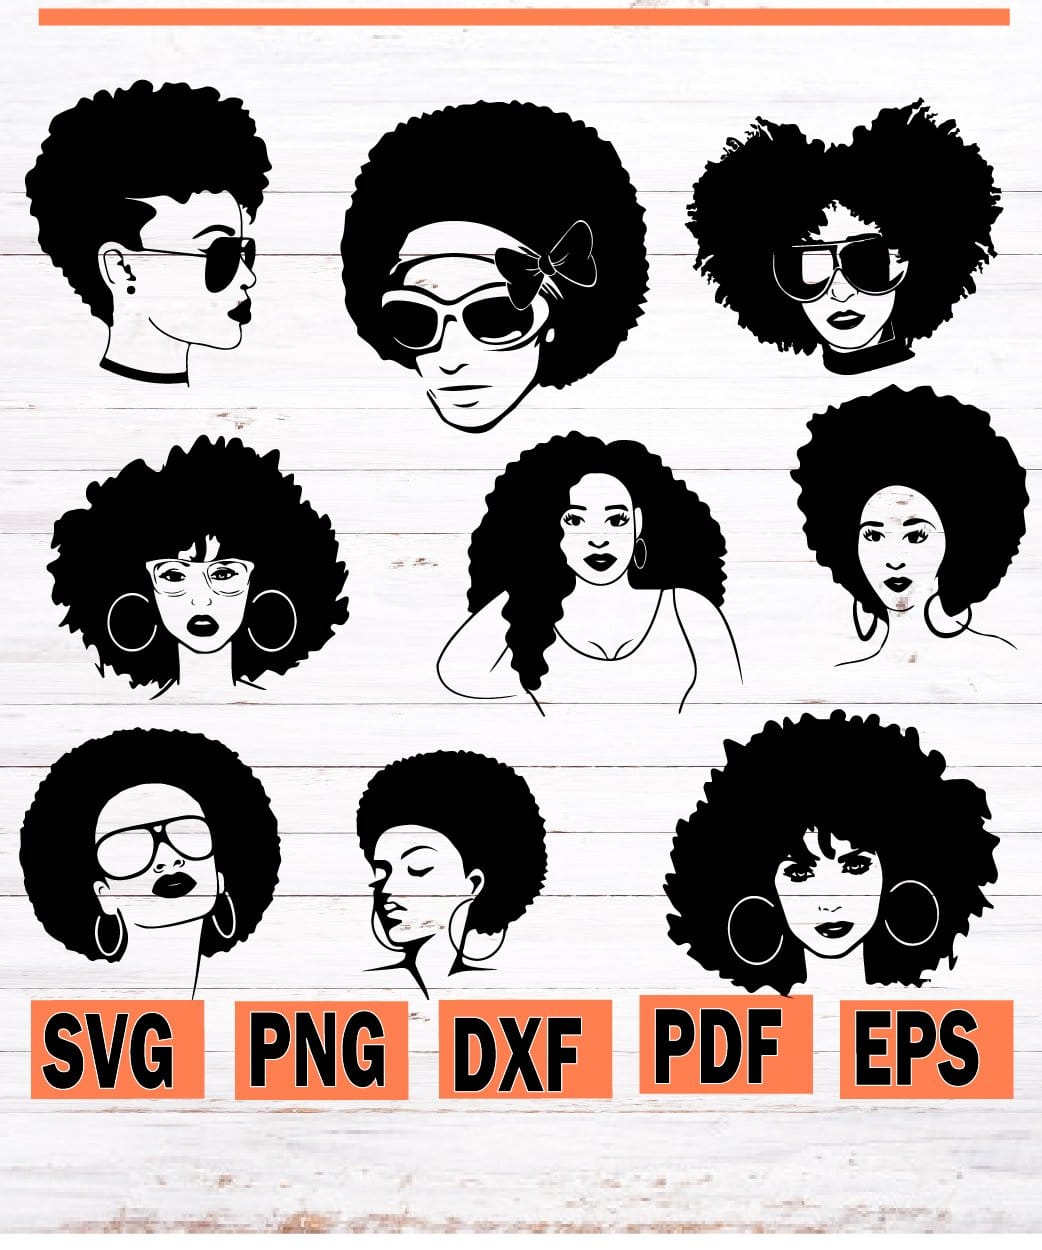 Black woman svg, Black girl svg, Afro Puffs svg, Pretty black educated svg, black queen svg, Black History month svg, African American Woman svg, Afro svg, Afro woman svg, Strong woman svg, Powerful svg, Beautiful svg, Queen svg, Girl power svg, Amazing Black svg, Melanin svg, Black Girl Magic svg, Black Women Are Amazing svg, Natural hair svg, Ponytail Hair svg, Blond Hair svg, Short hair svg, Bald woman svg, Afro Bundle Svg, Afro SVG, Black Queen Svg